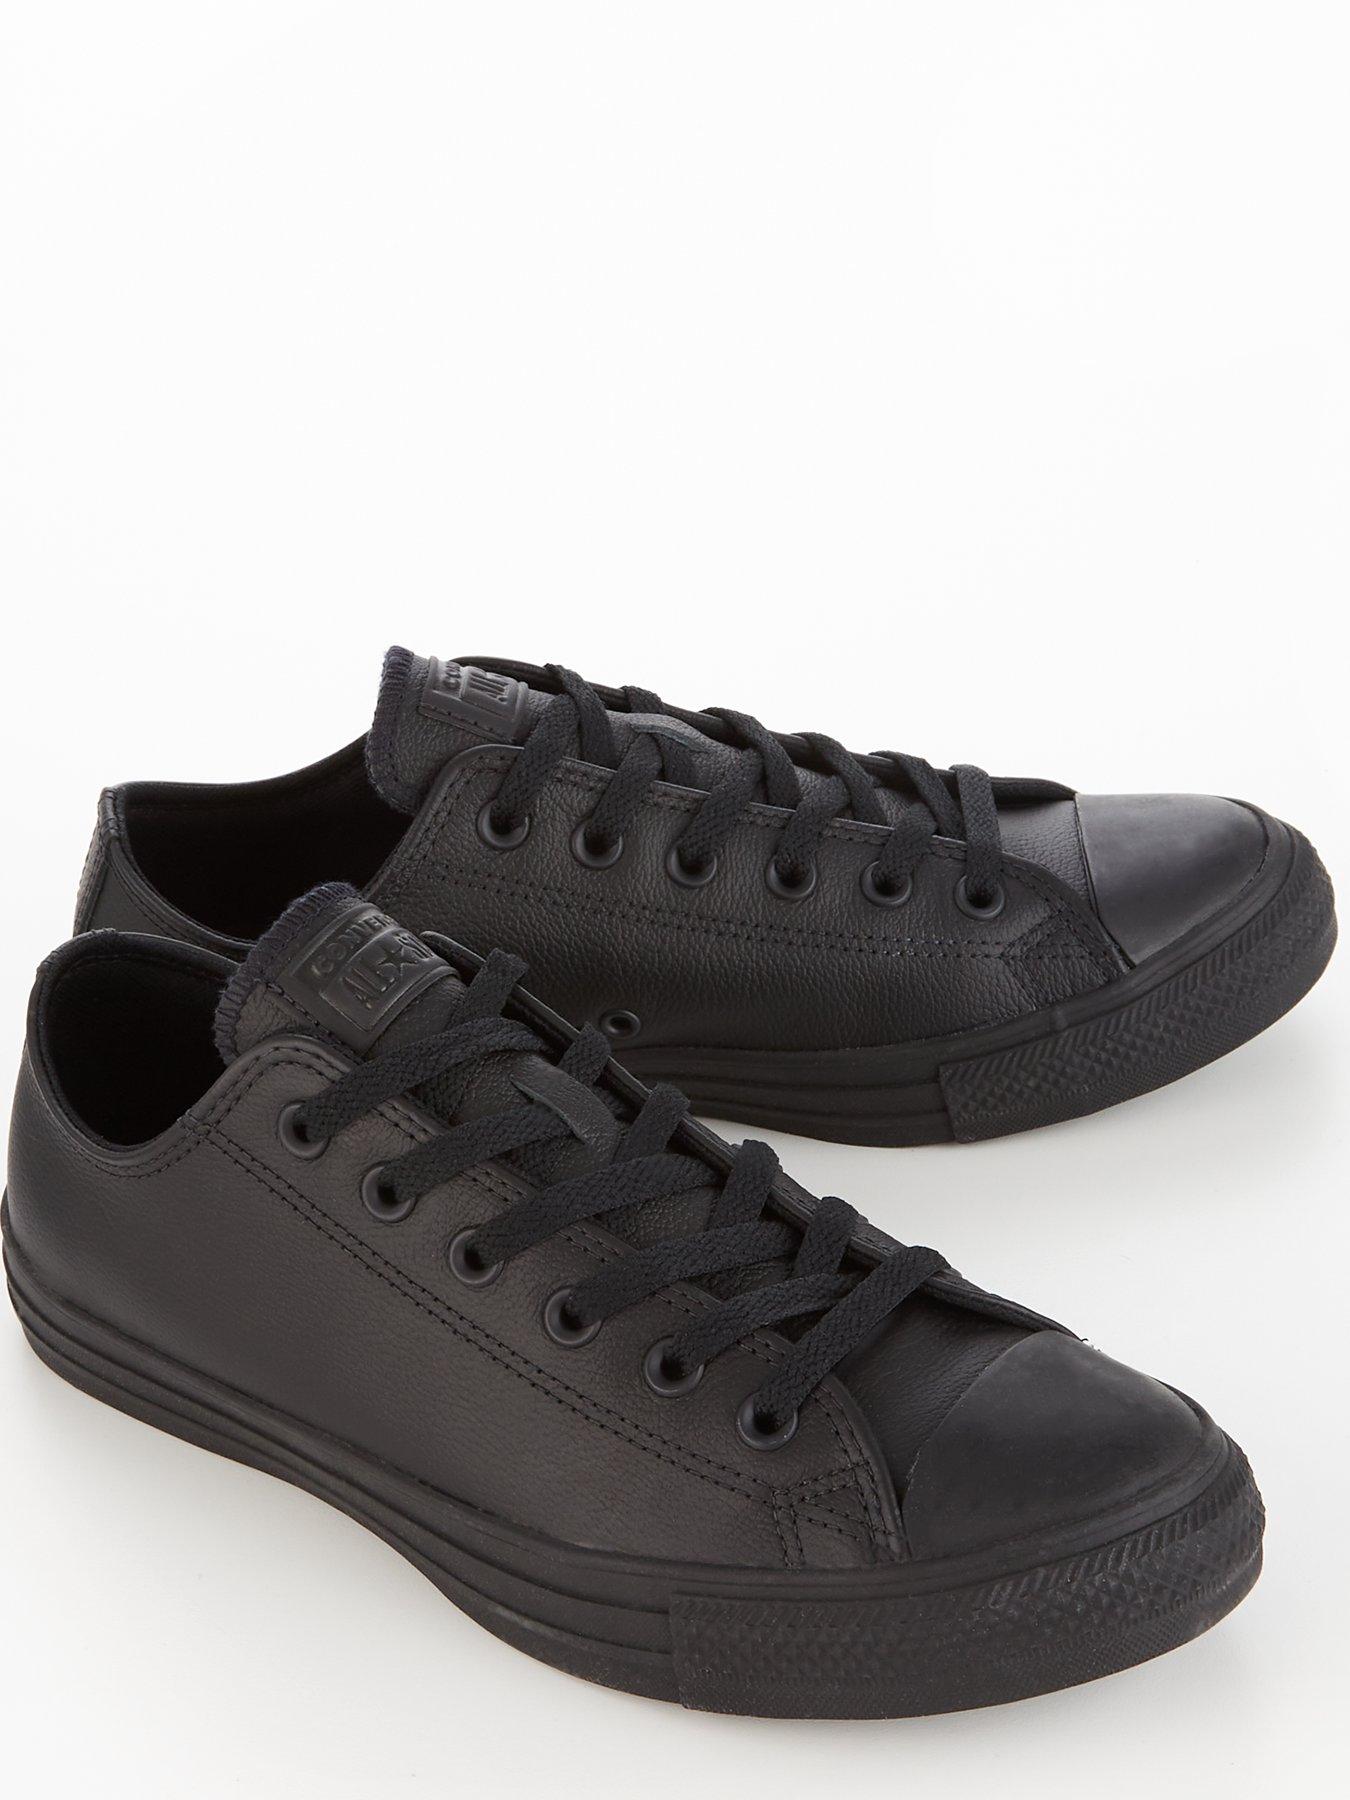 Converse Chuck Taylor All Star Leather Ox - Black | very.co.uk